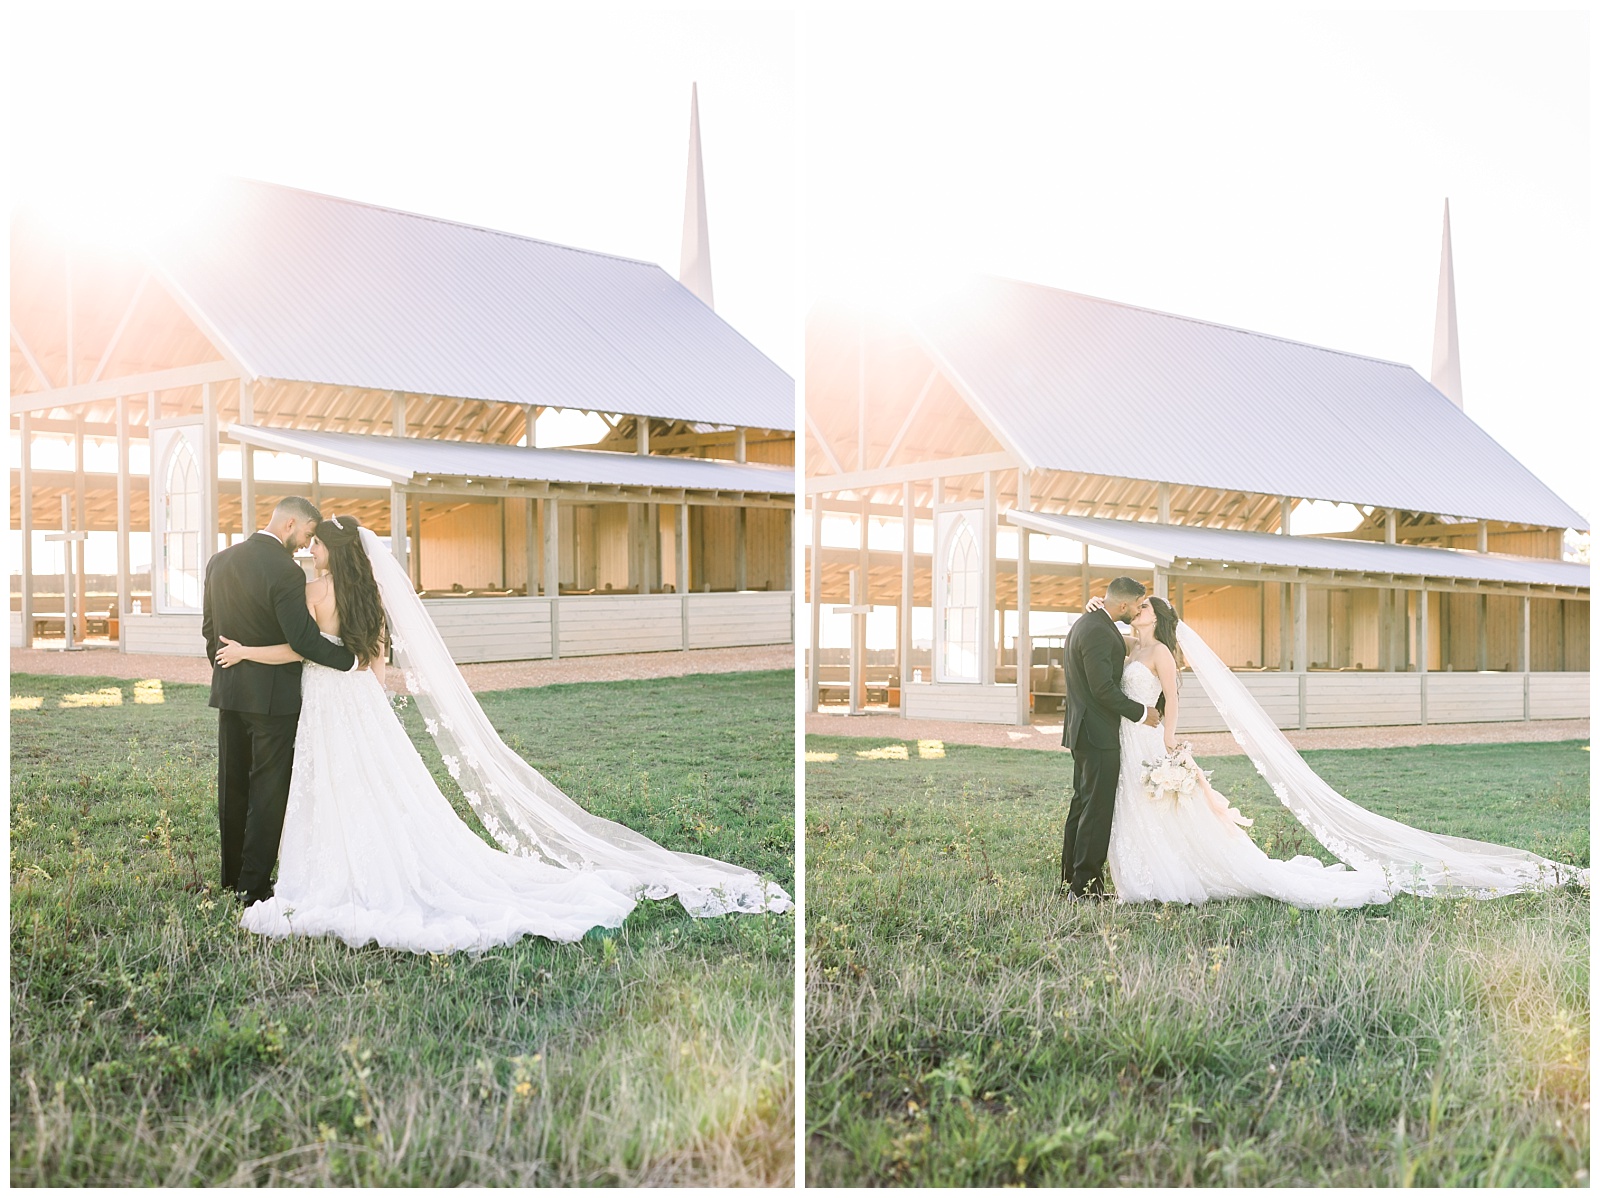 Beautiful side by sides of the bride and groom in the kissing during the sunset for a Romantic Wedding at The Allen Farmhaus in New Braunfels, TX | San Antonio-Maui-Destination Wedding Photographer | Monica Roberts Photography | www.monicaroberts.com